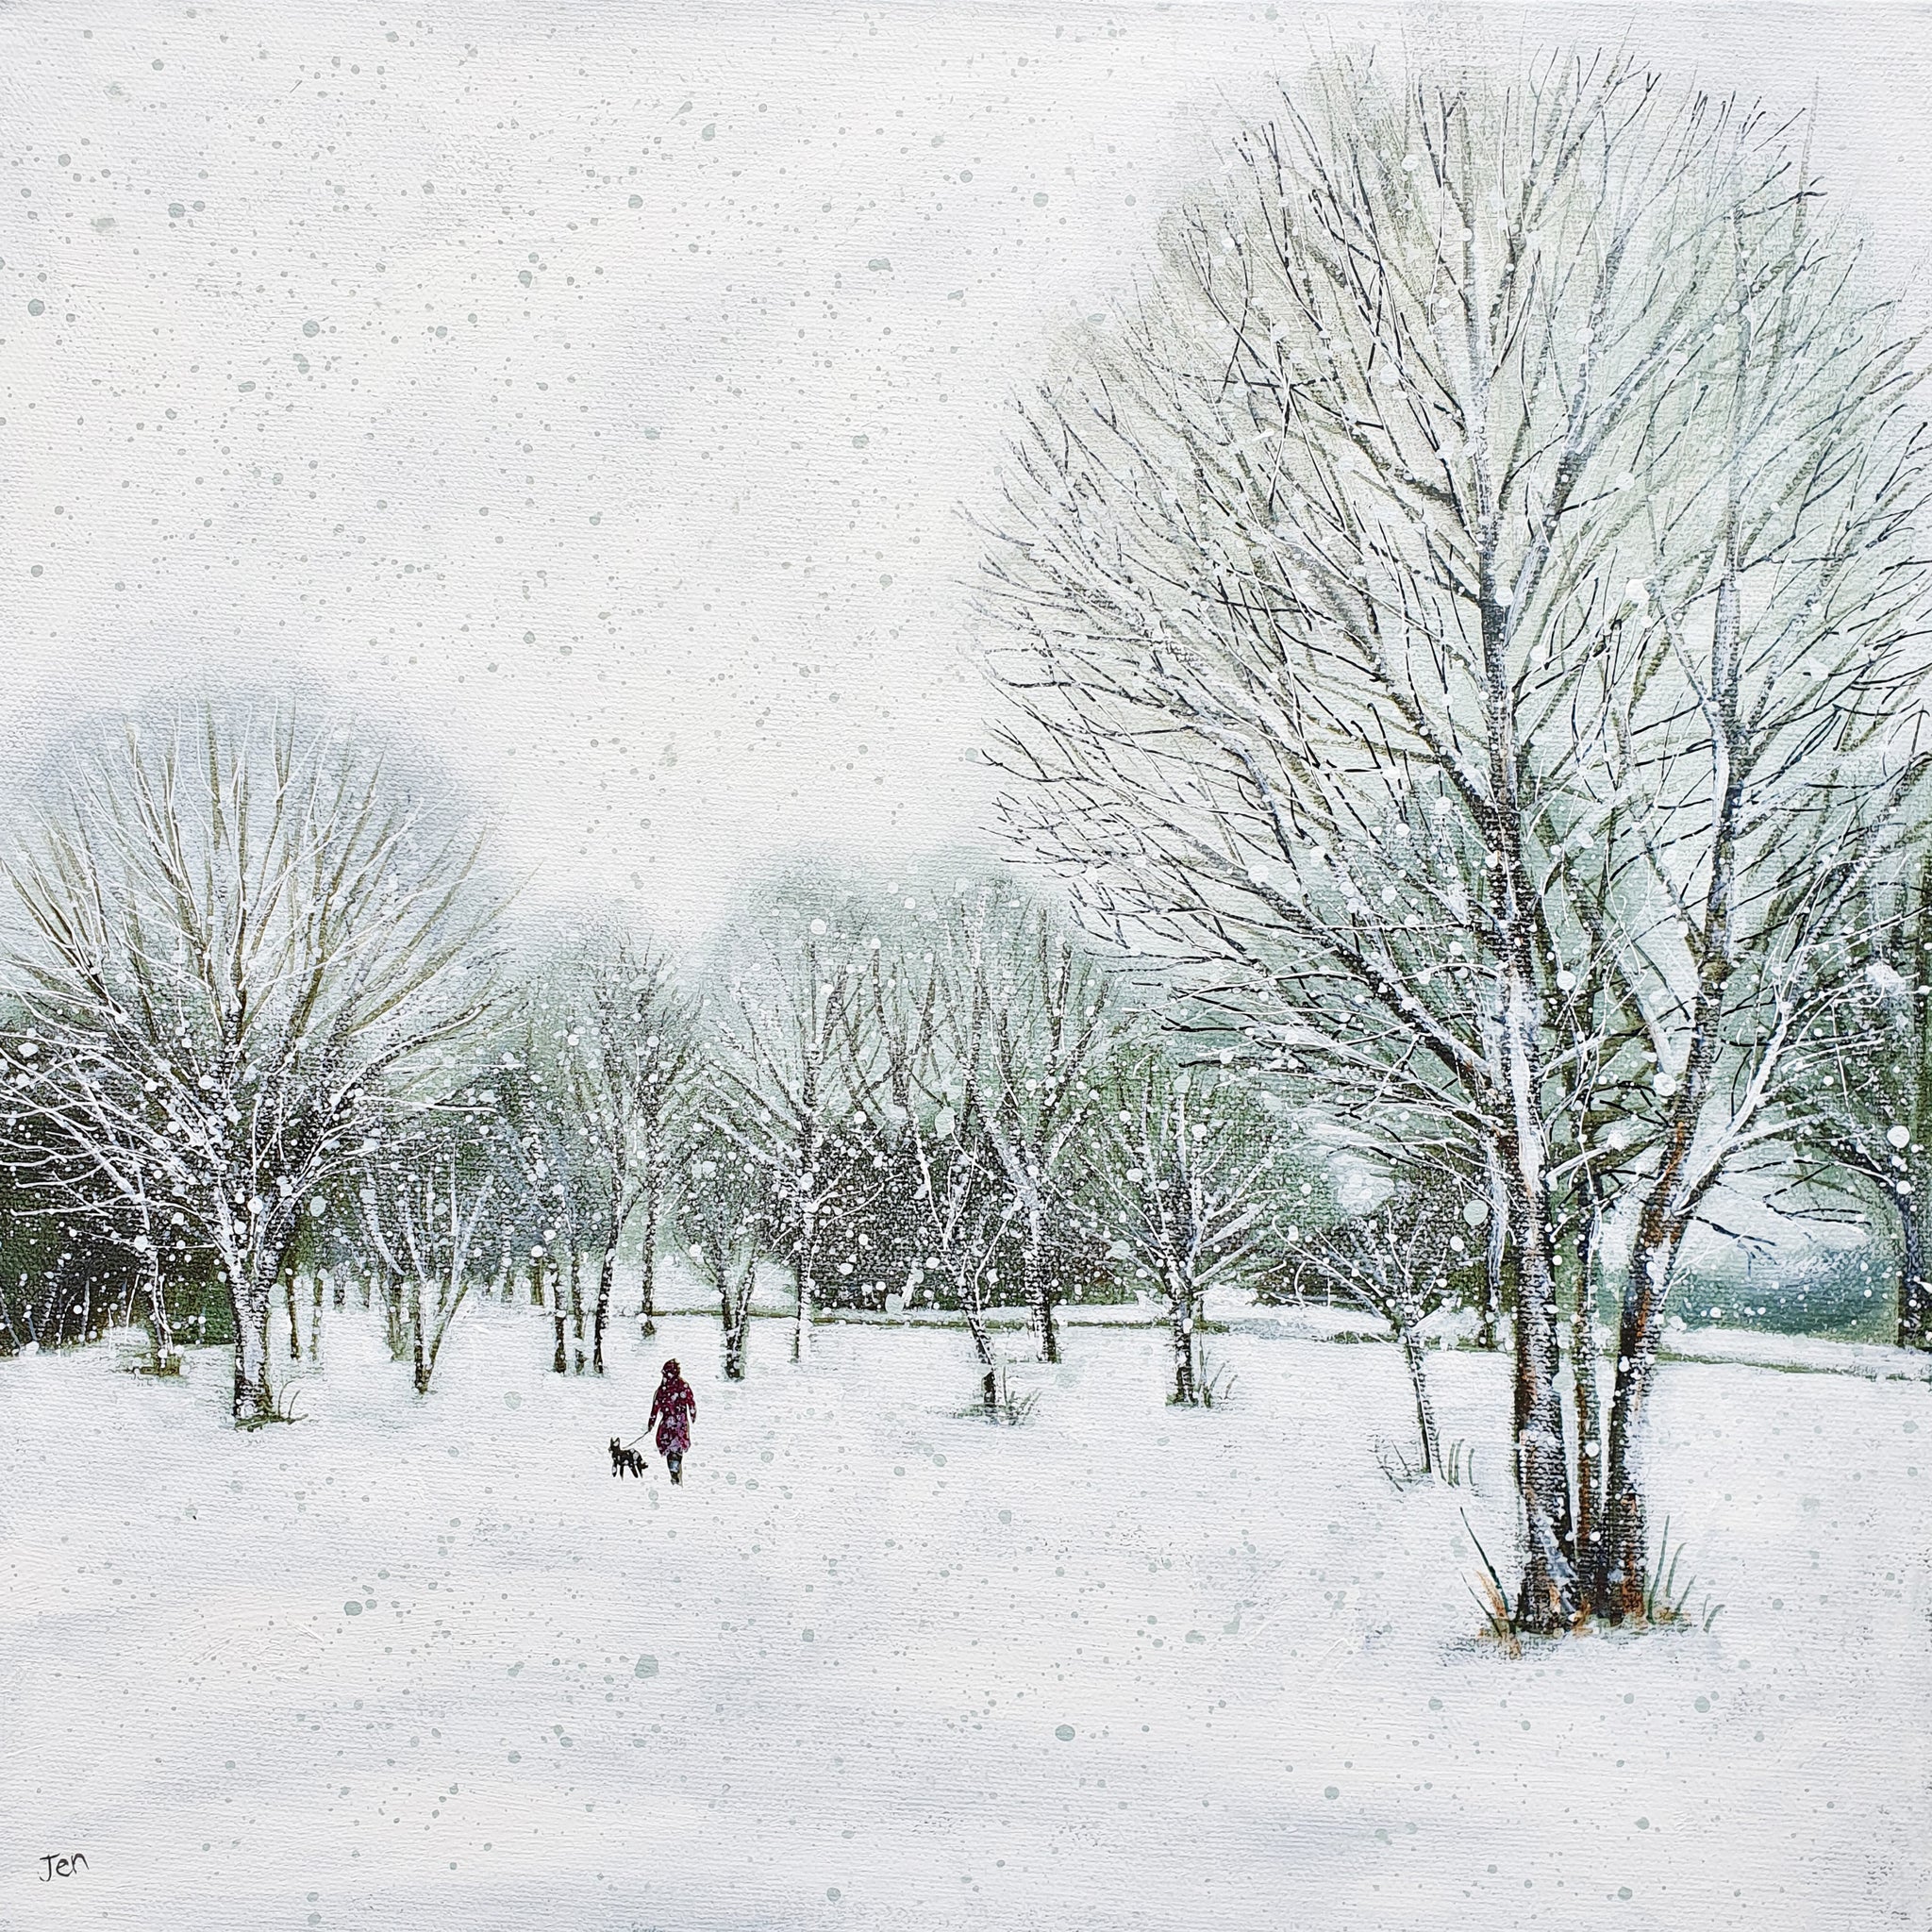 Snow on the Downs in Westbury Park, Bristol. Painting by Jenny Urquhart at The Bristol Shop